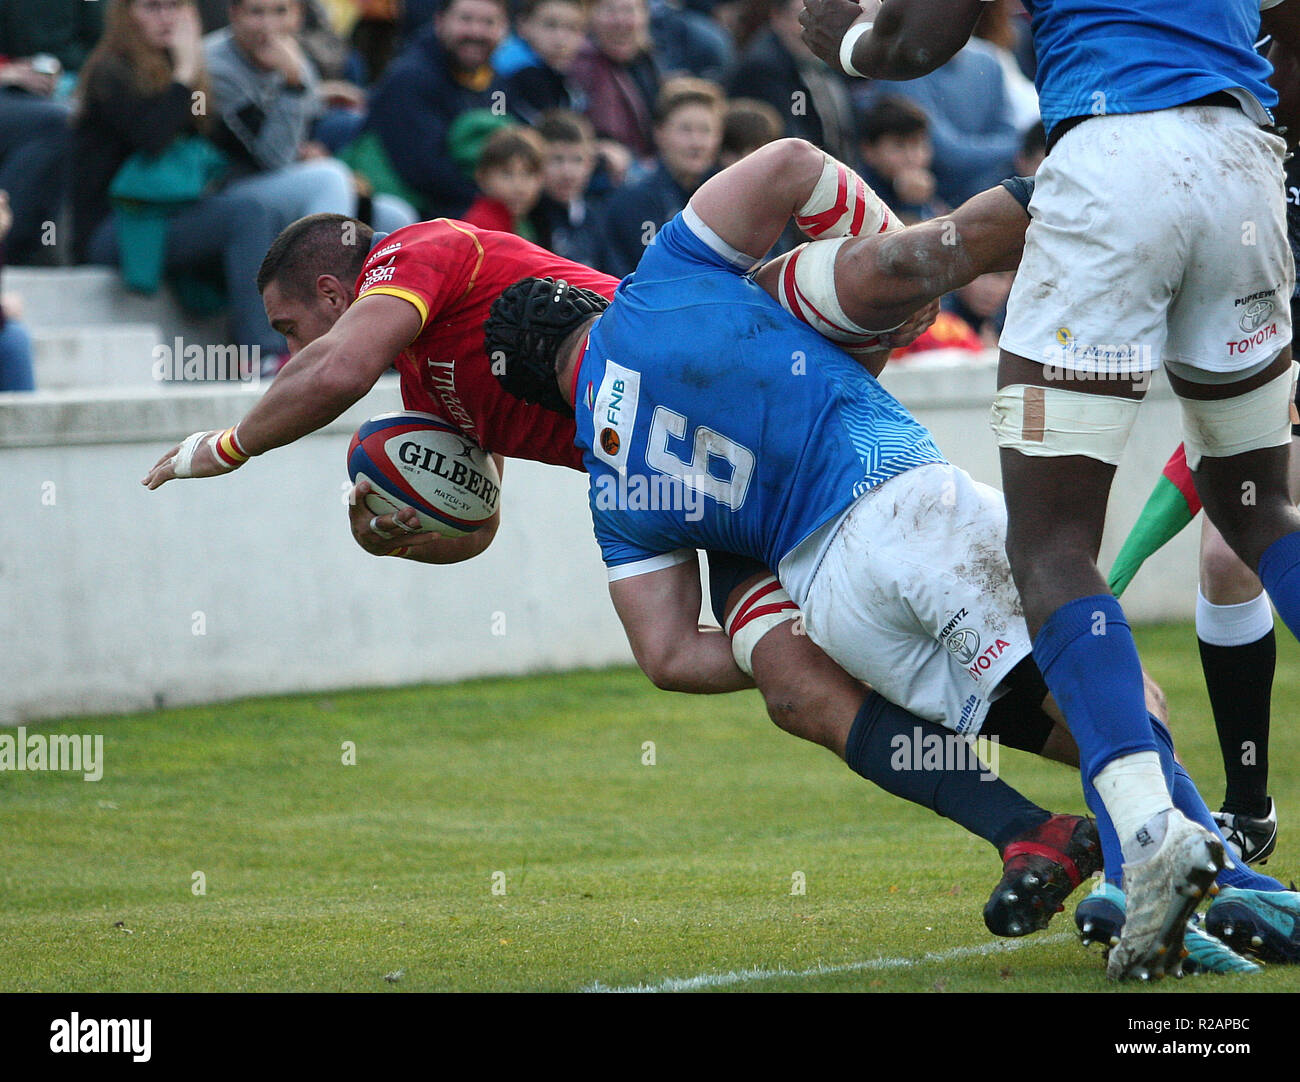 Madrid, Spain. 18/11/2018, Rugby Test Match  Victor Sanchez of Spain  and  Kitshoff, Rohan of Namibia,in game action during  the match between Spain-Namibia to Universidad Complutence Stadium,to Madrid Spain. Credit: Leo Cavallo/Alamy Live News Stock Photo